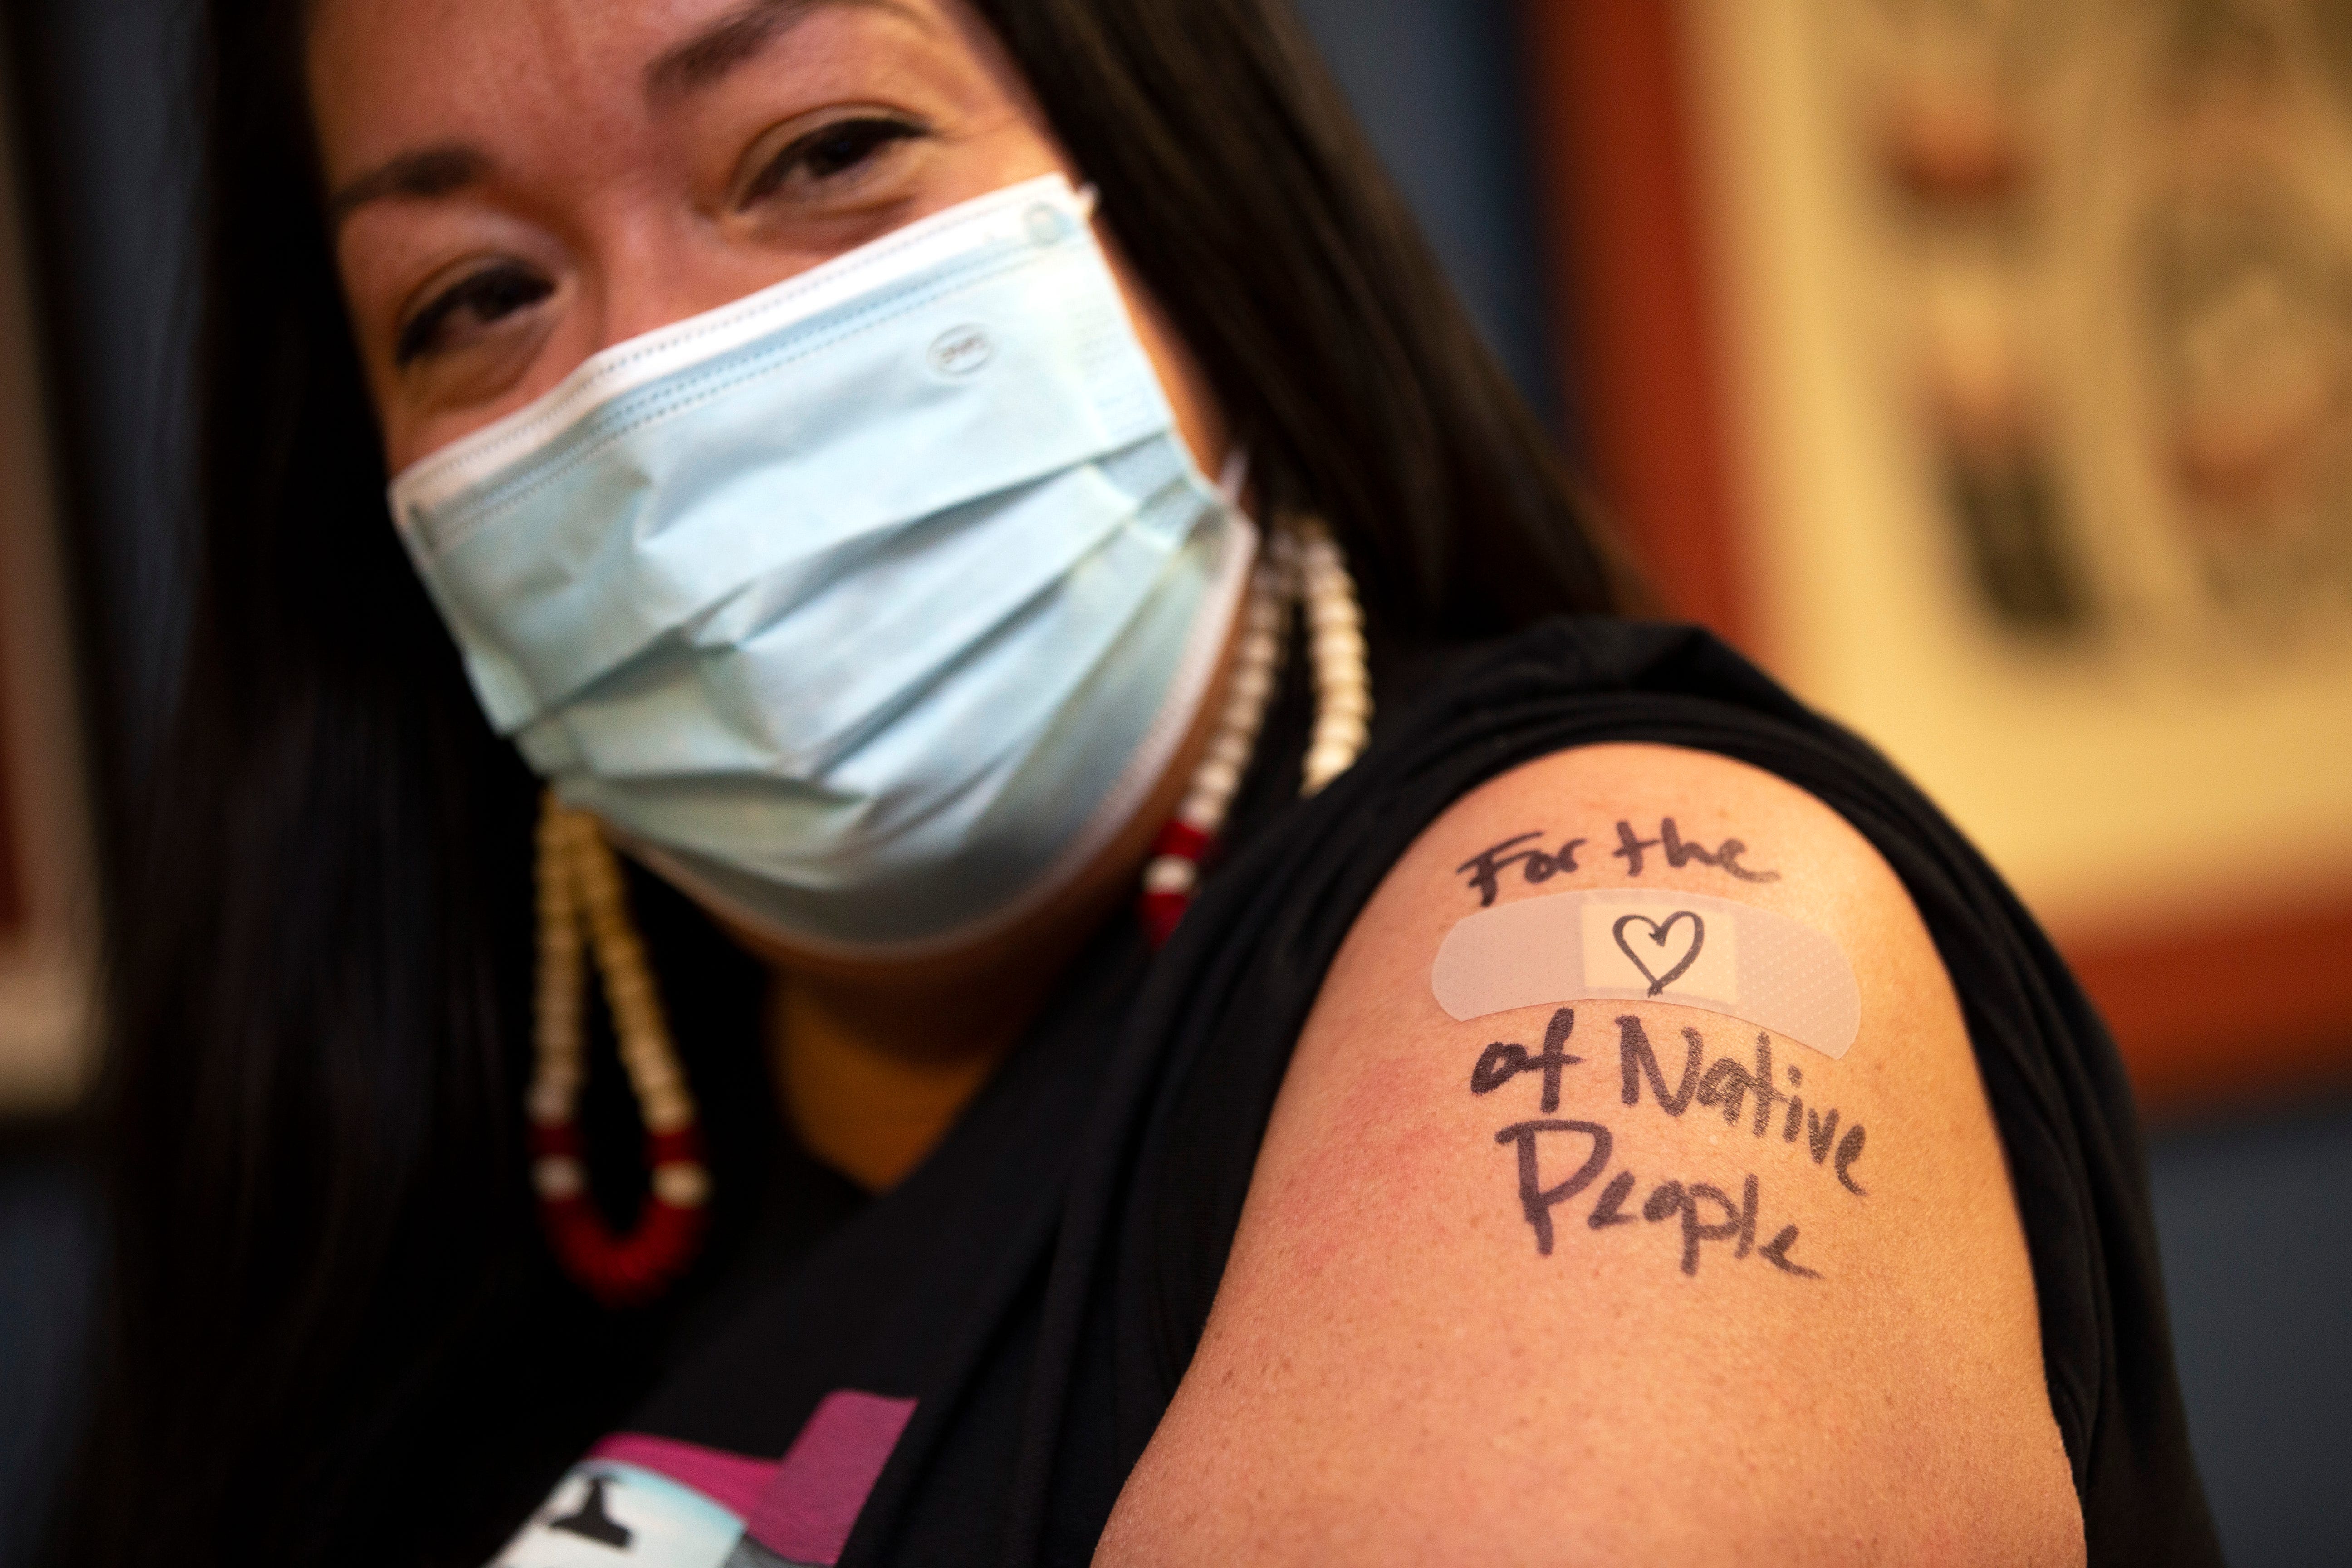 Abigail Echo-Hawk, chief research officer with the Seattle Indian Health Board and a member of the Pawnee Tribe, shows off her arm after she received a shot of the Moderna COVID-19 vaccine in Seattle. A colleague used a black pen to inscribe "For the (Heart) love of Native People" over the spot where she got the injection.